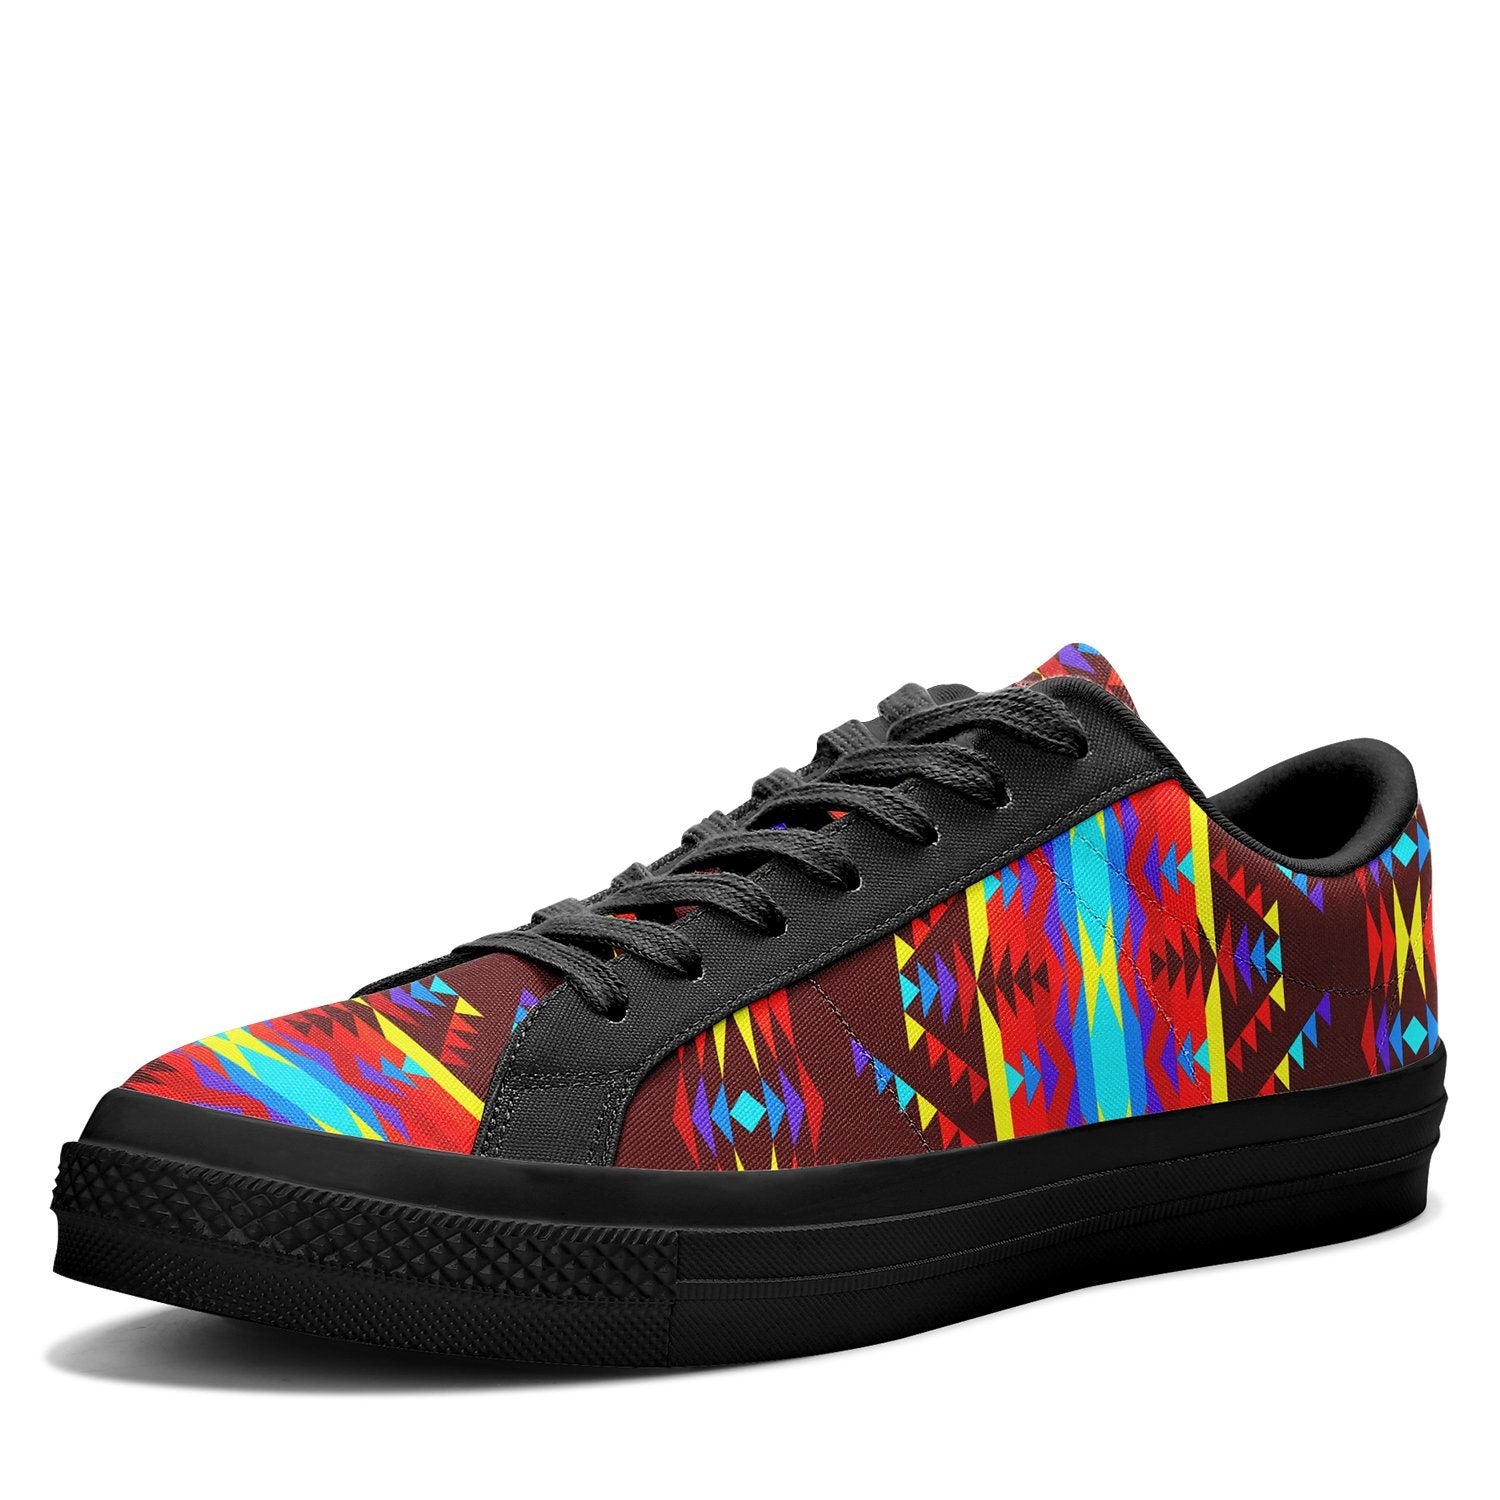 Visions of Lasting Peace Aapisi Low Top Canvas Shoes Black Sole 49 Dzine 